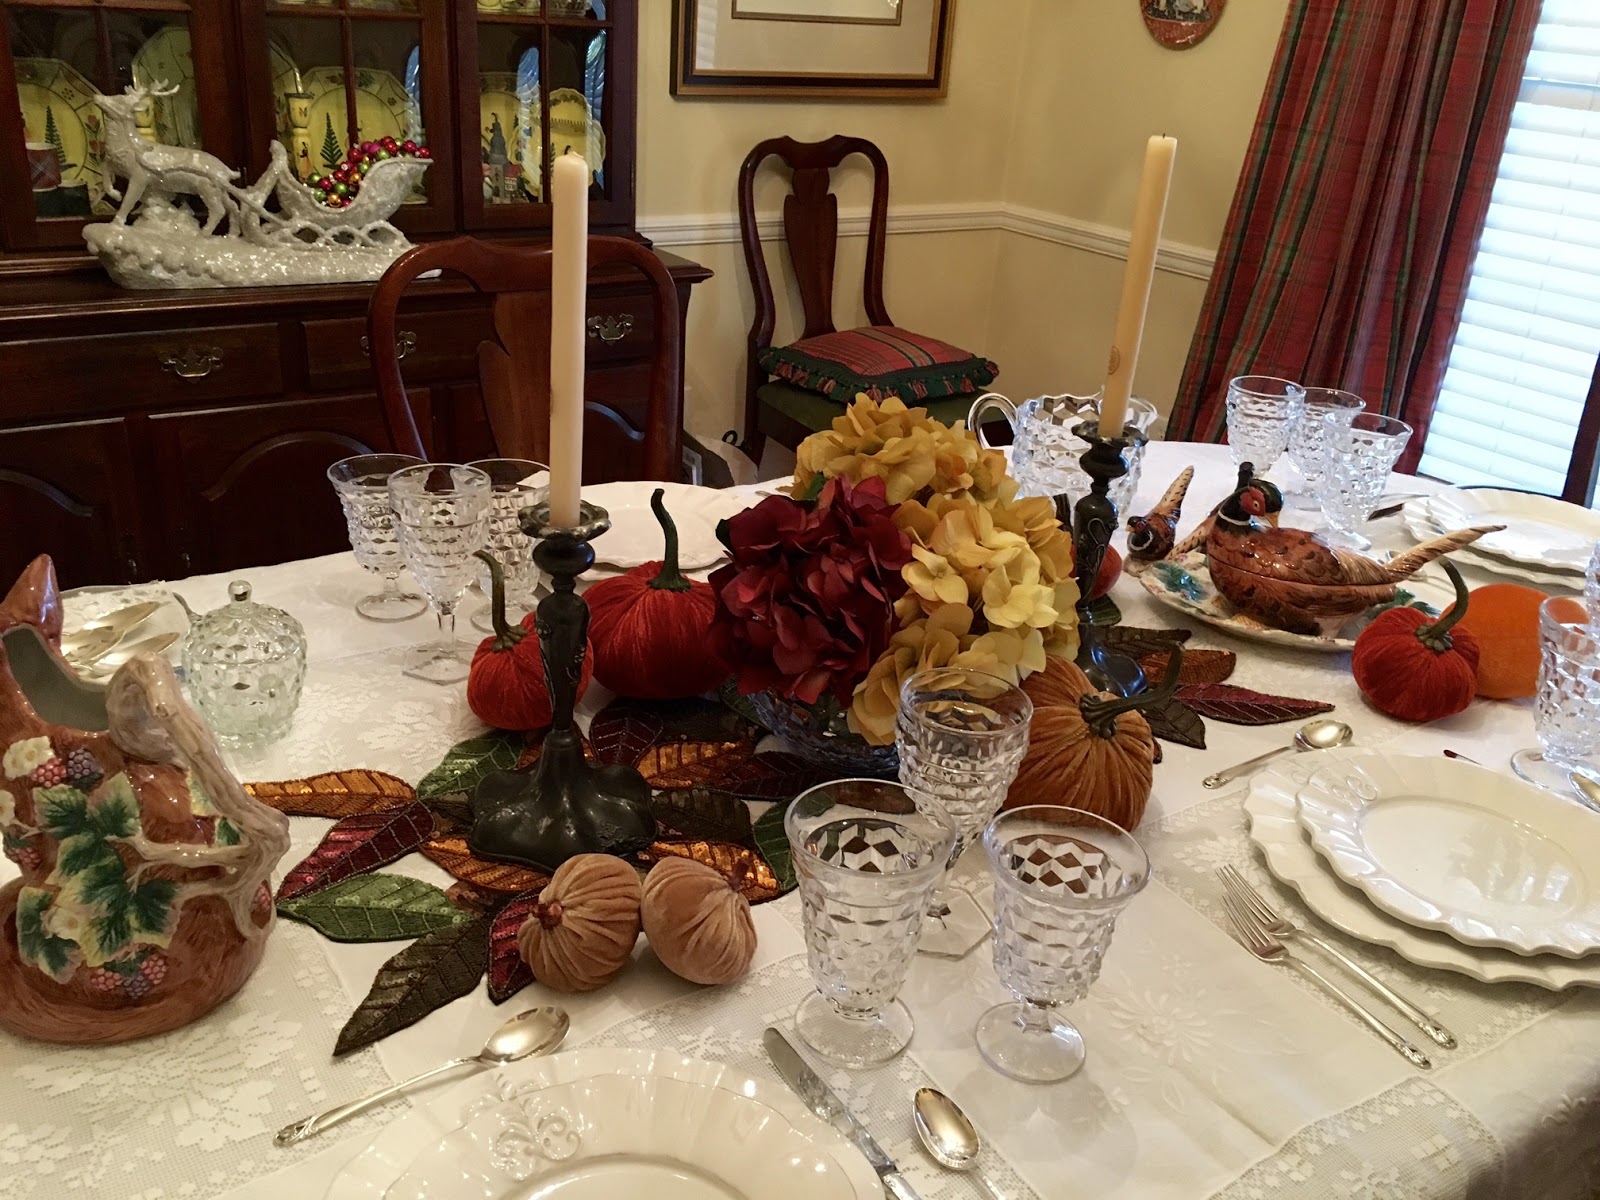 THE FRENCH HUTCH: GIVING THANKS